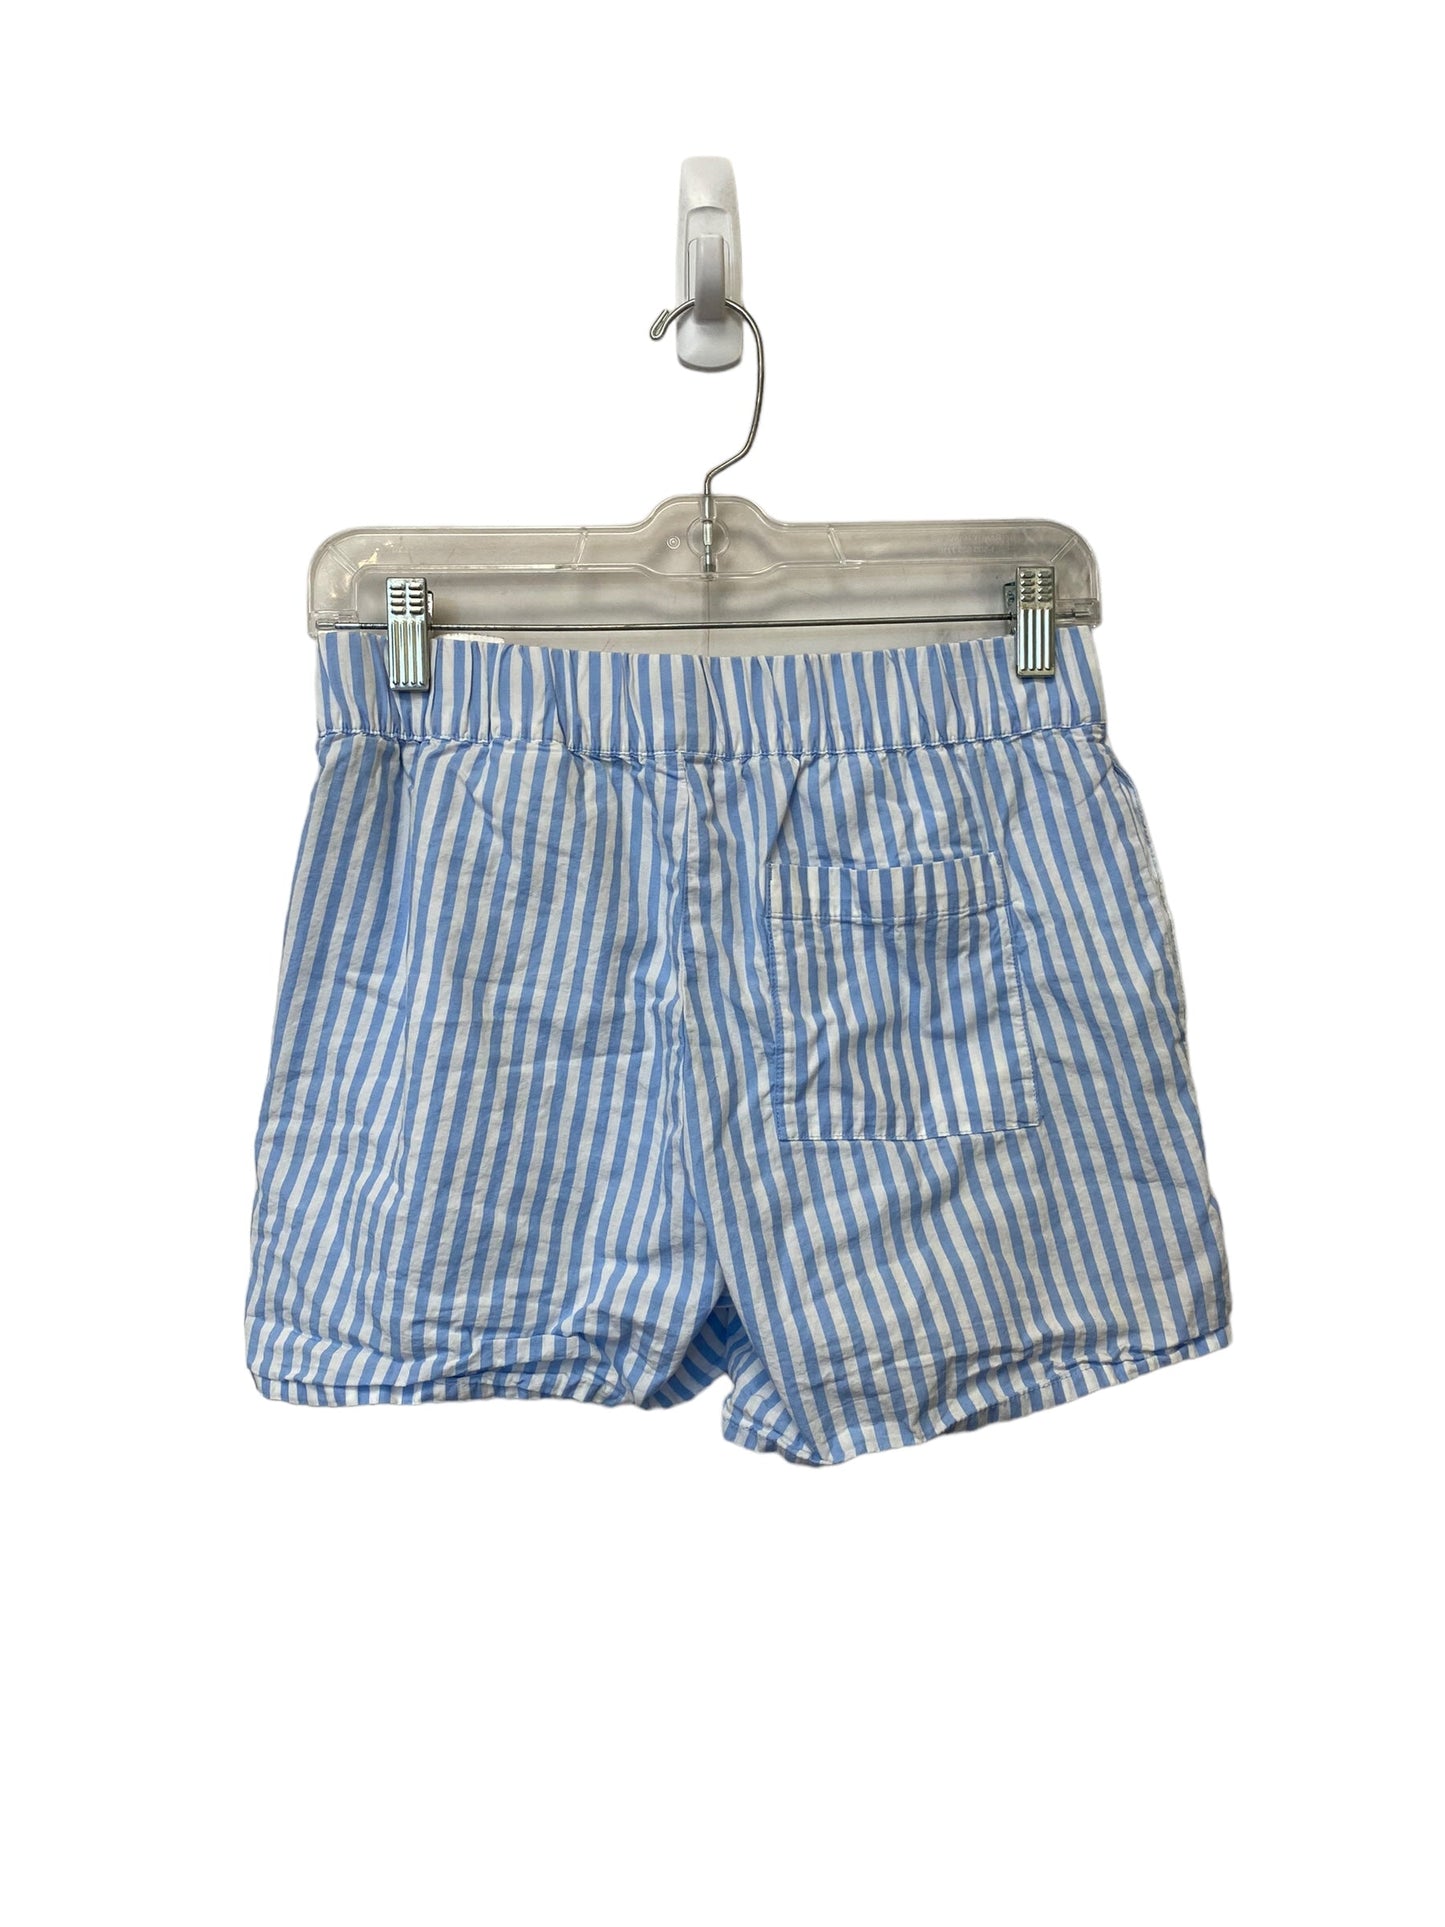 Striped Pattern Shorts Divided, Size Xs